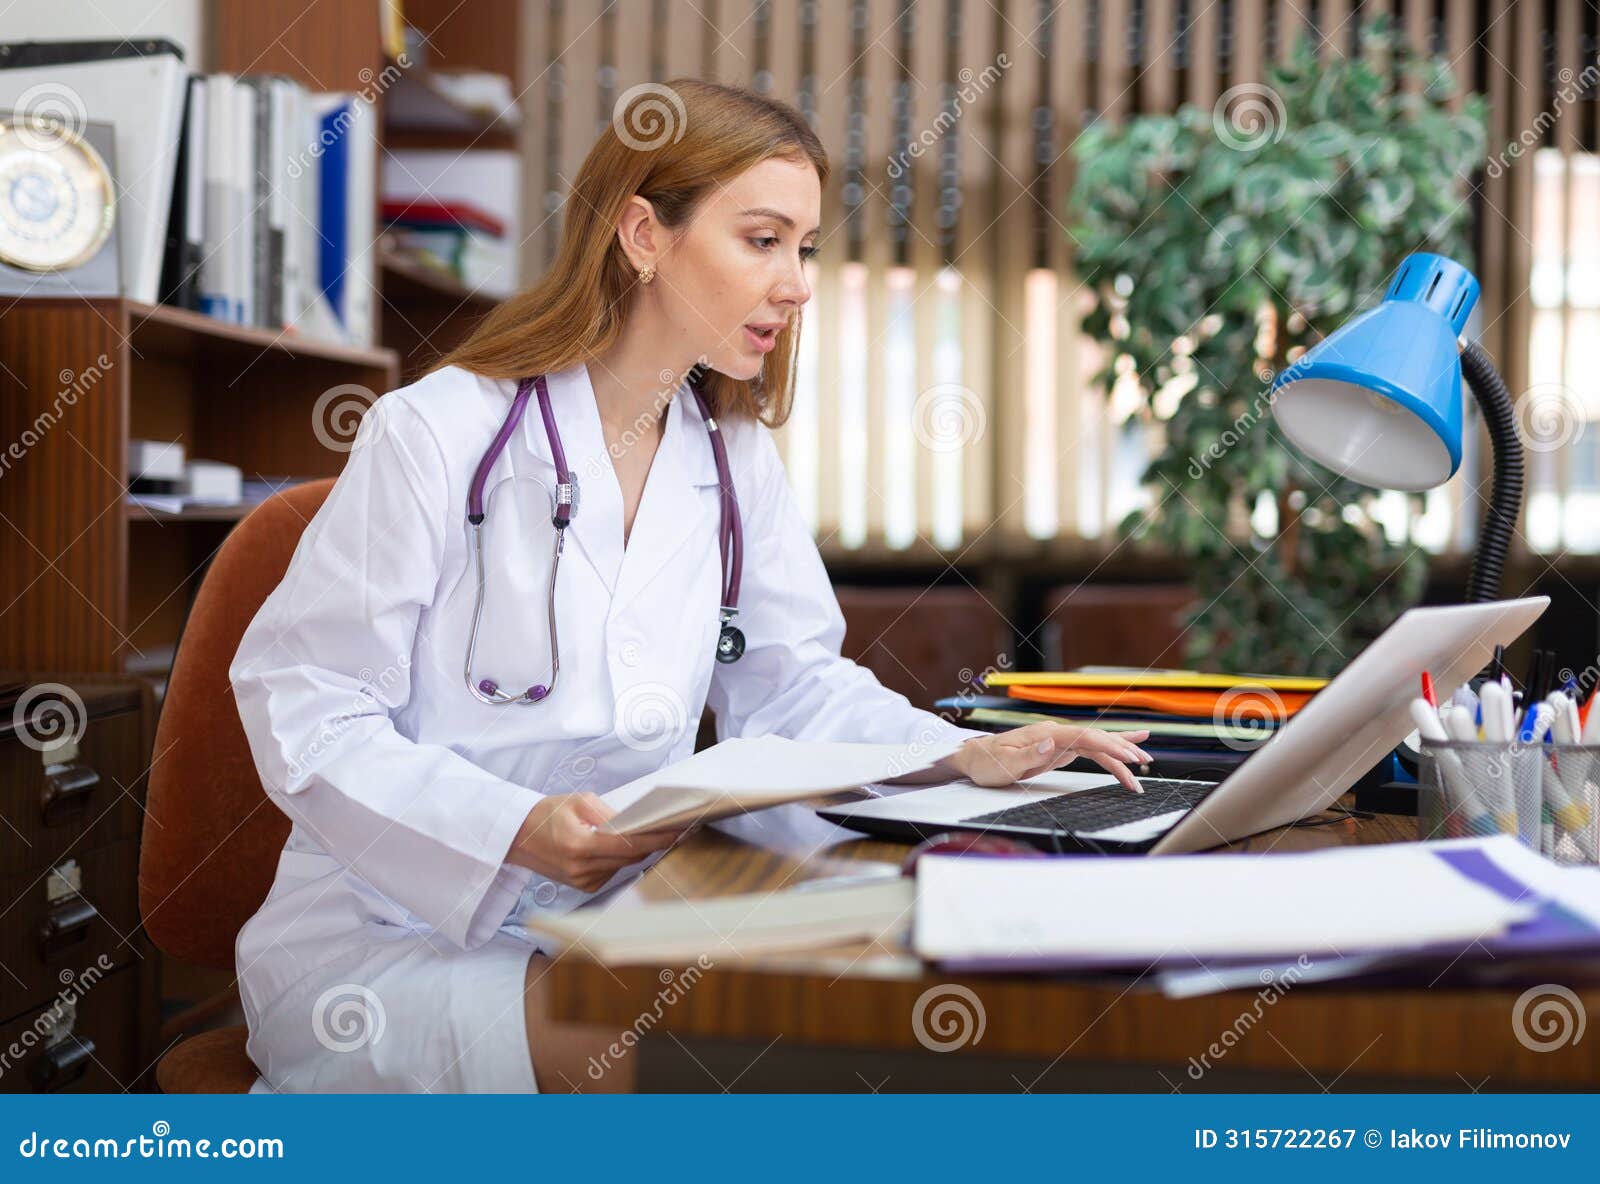 young woman internist studies the patient's outpatient card, typing the treatment appointment on the computer in the